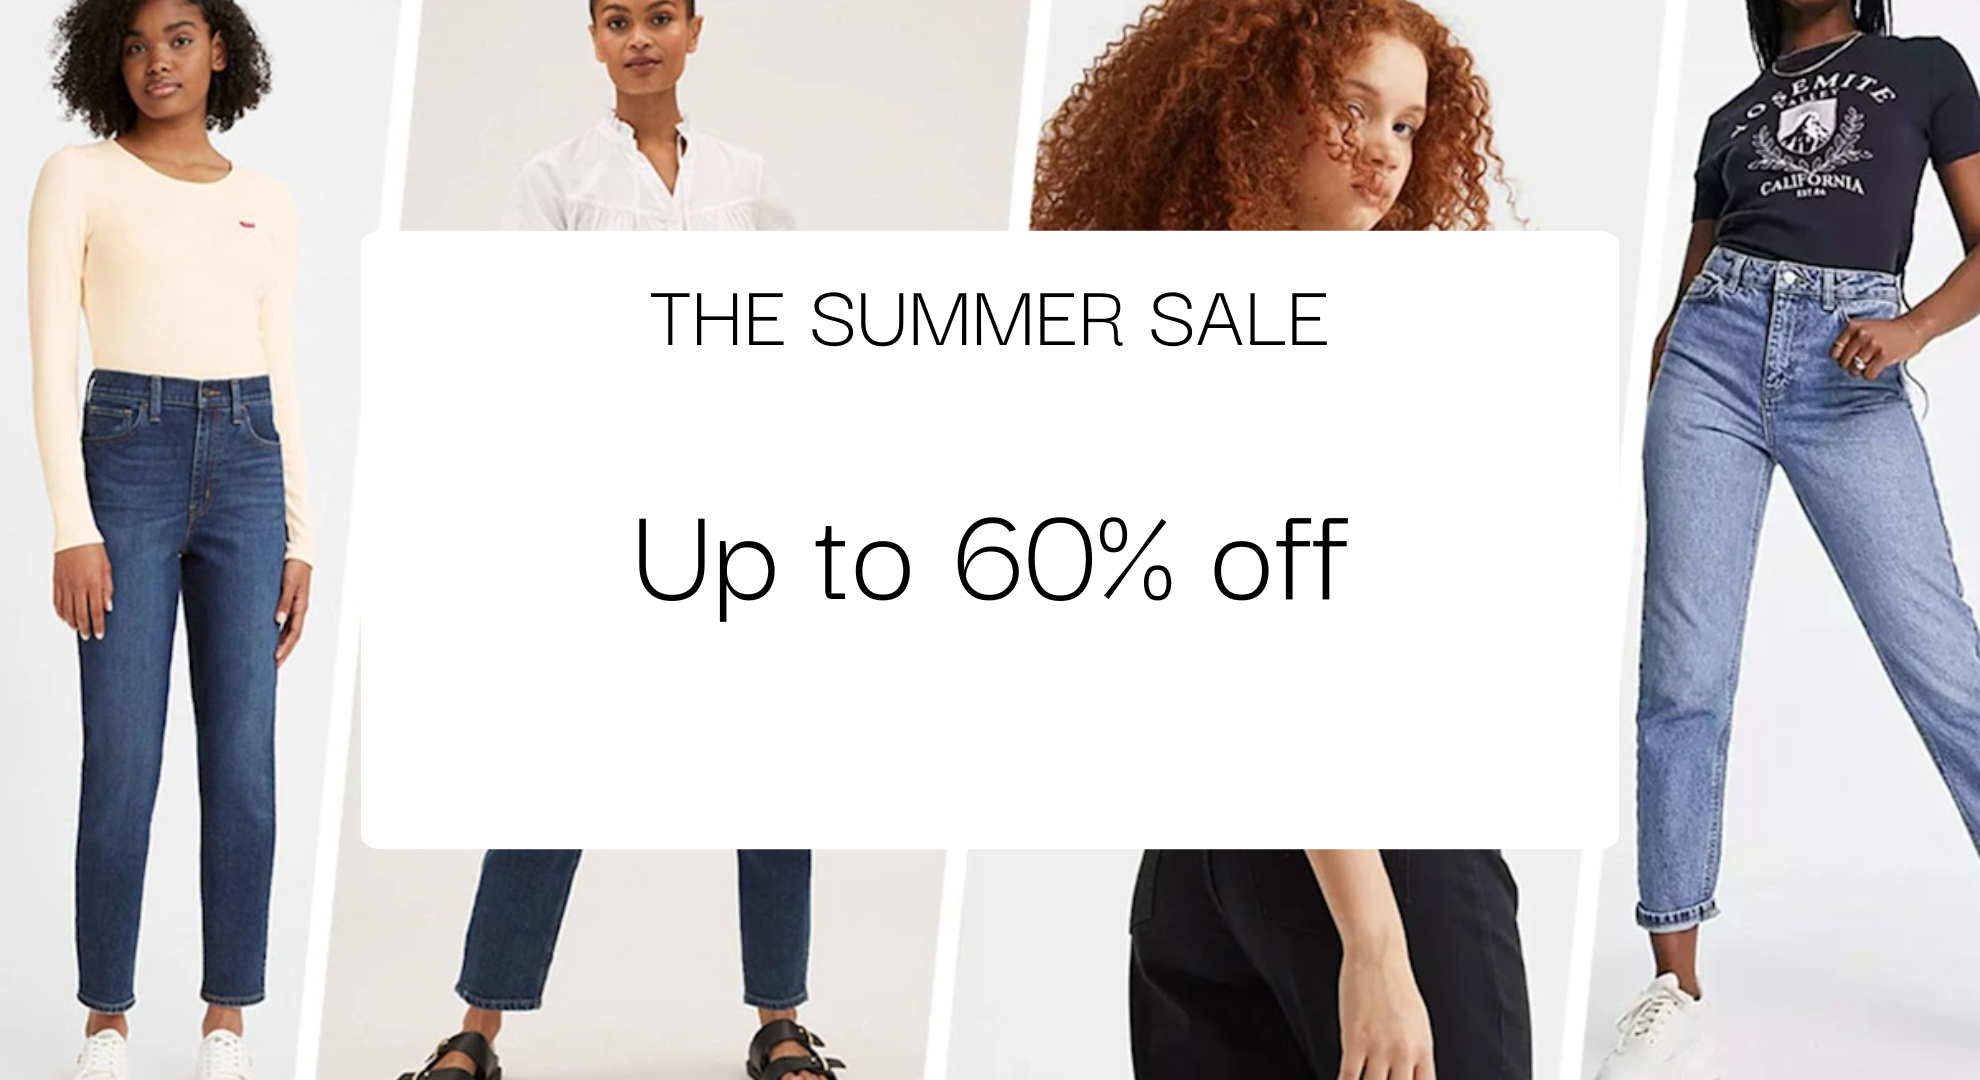 Denim vibe summer sale is live now. Up to 60% off!